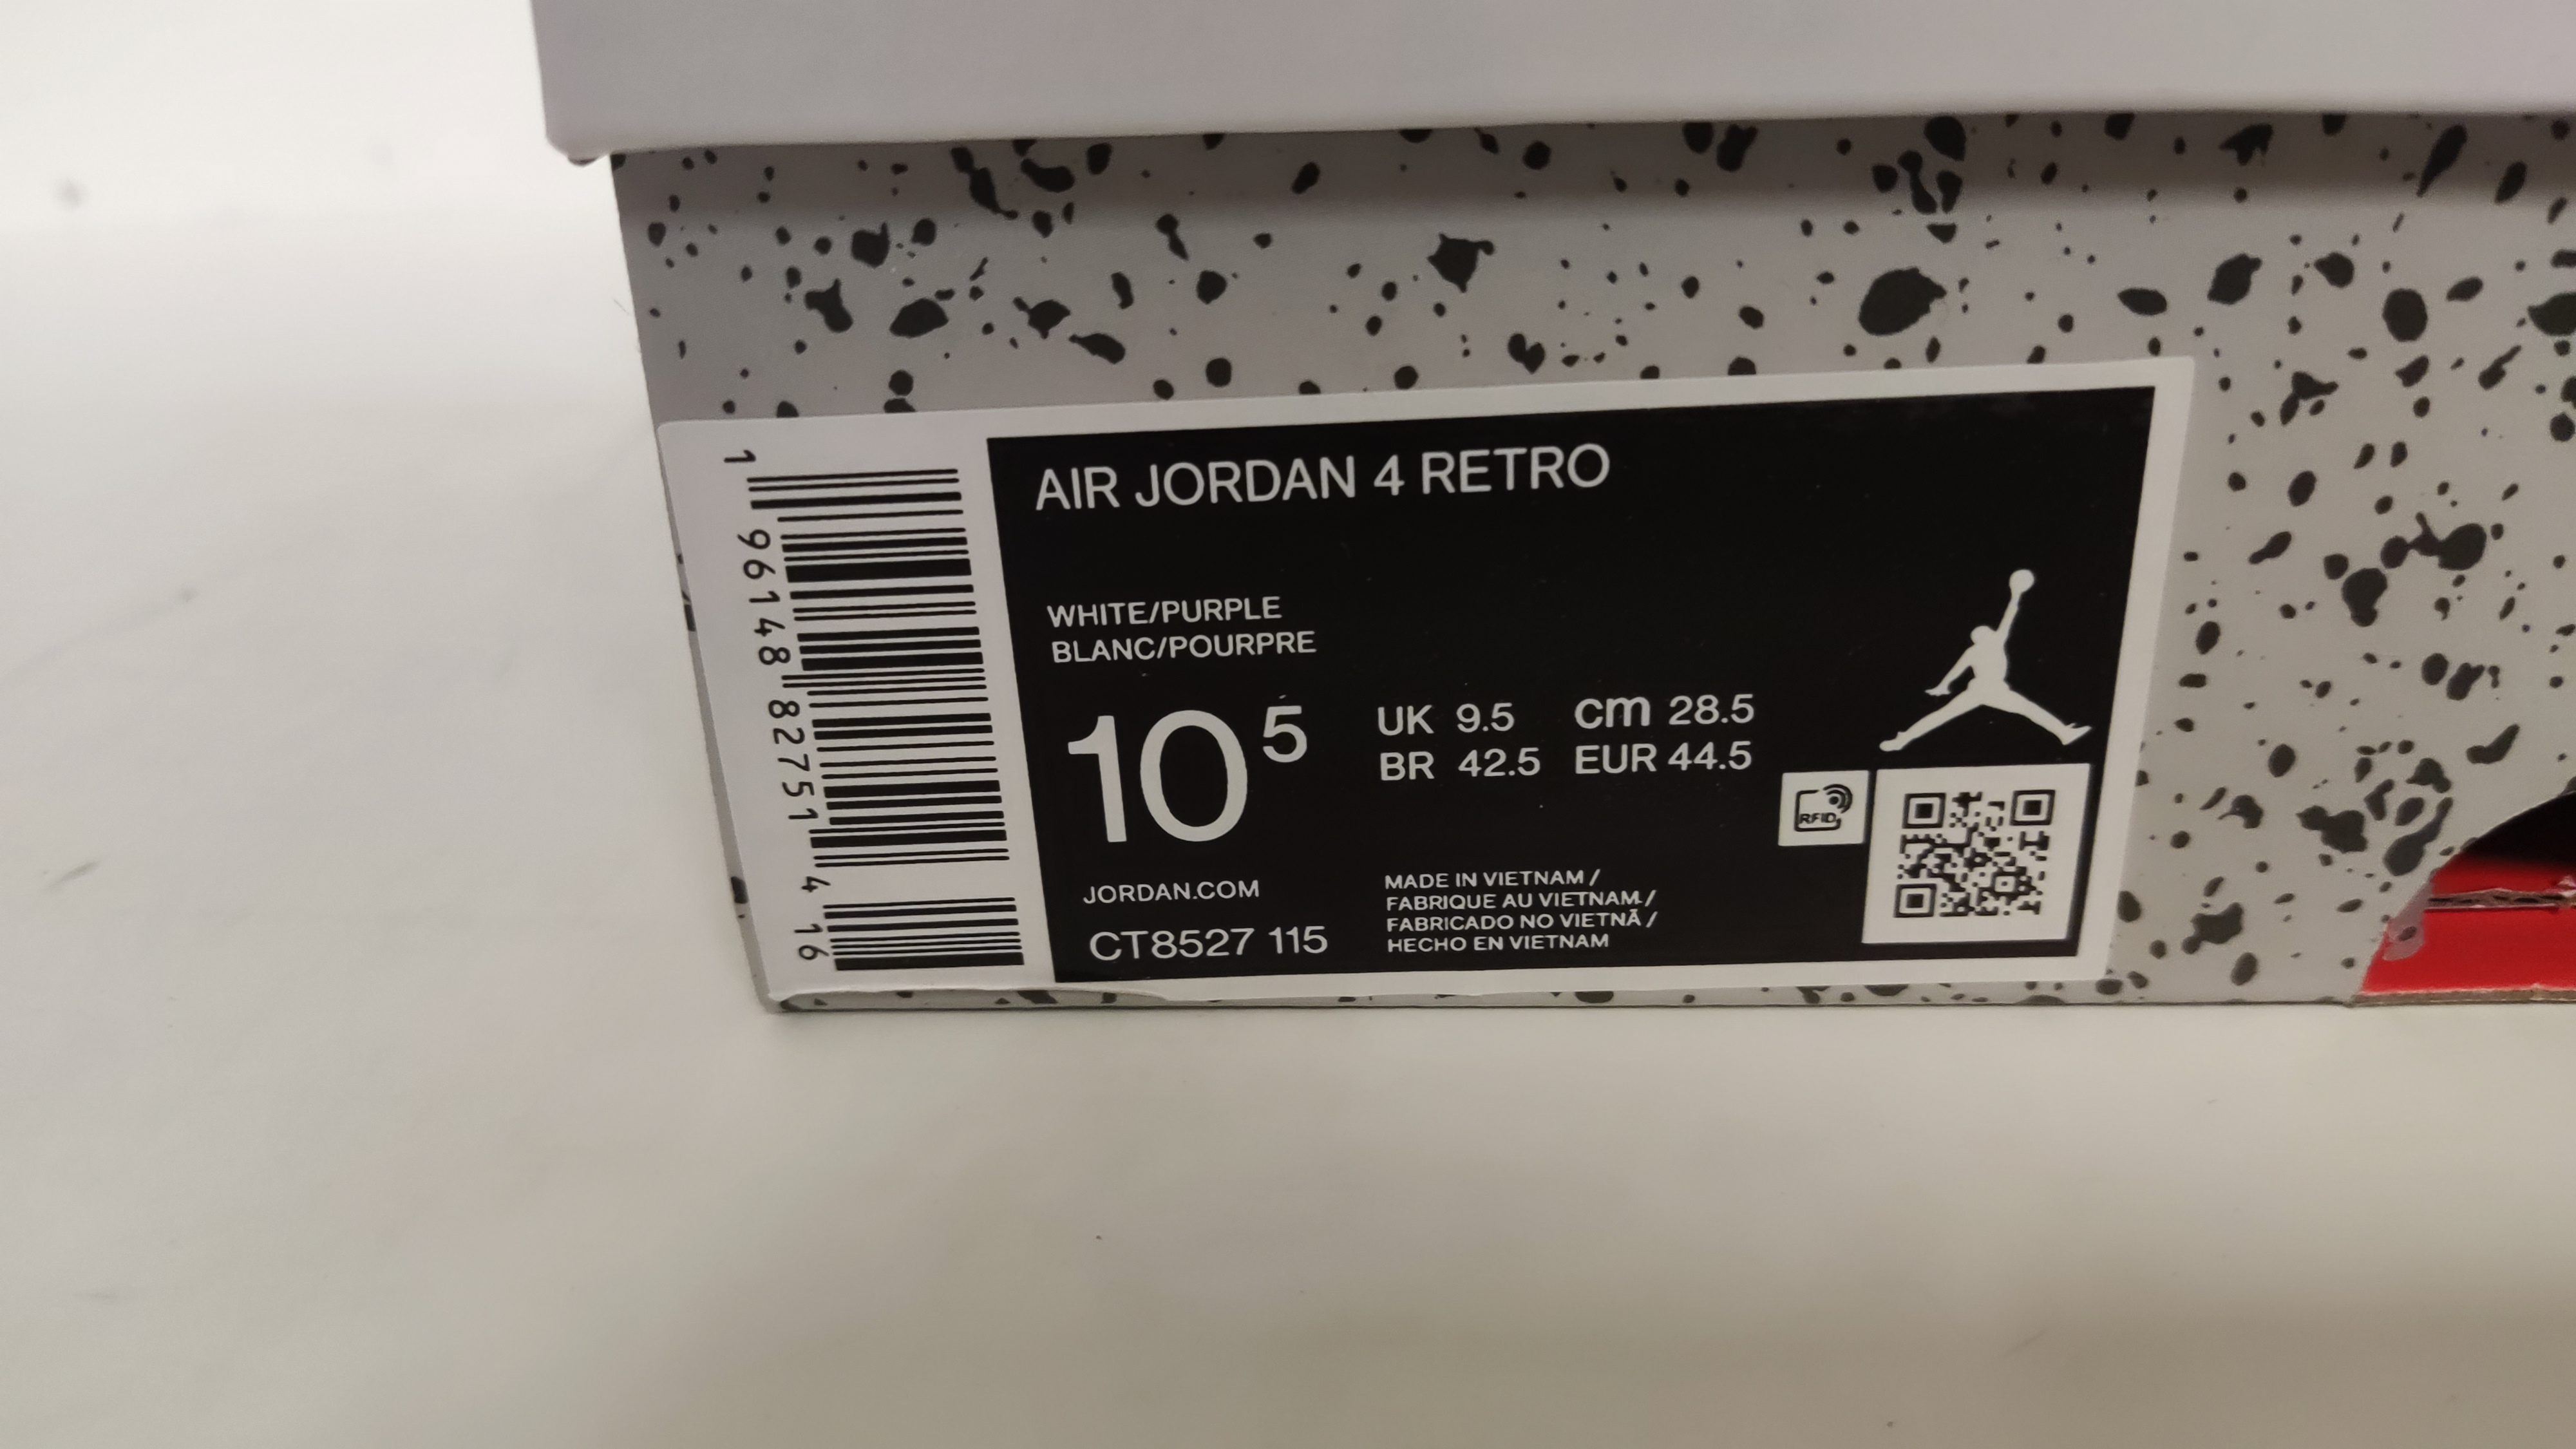 QC Picture Replica Jordan 4 White Pink From Jdfoot